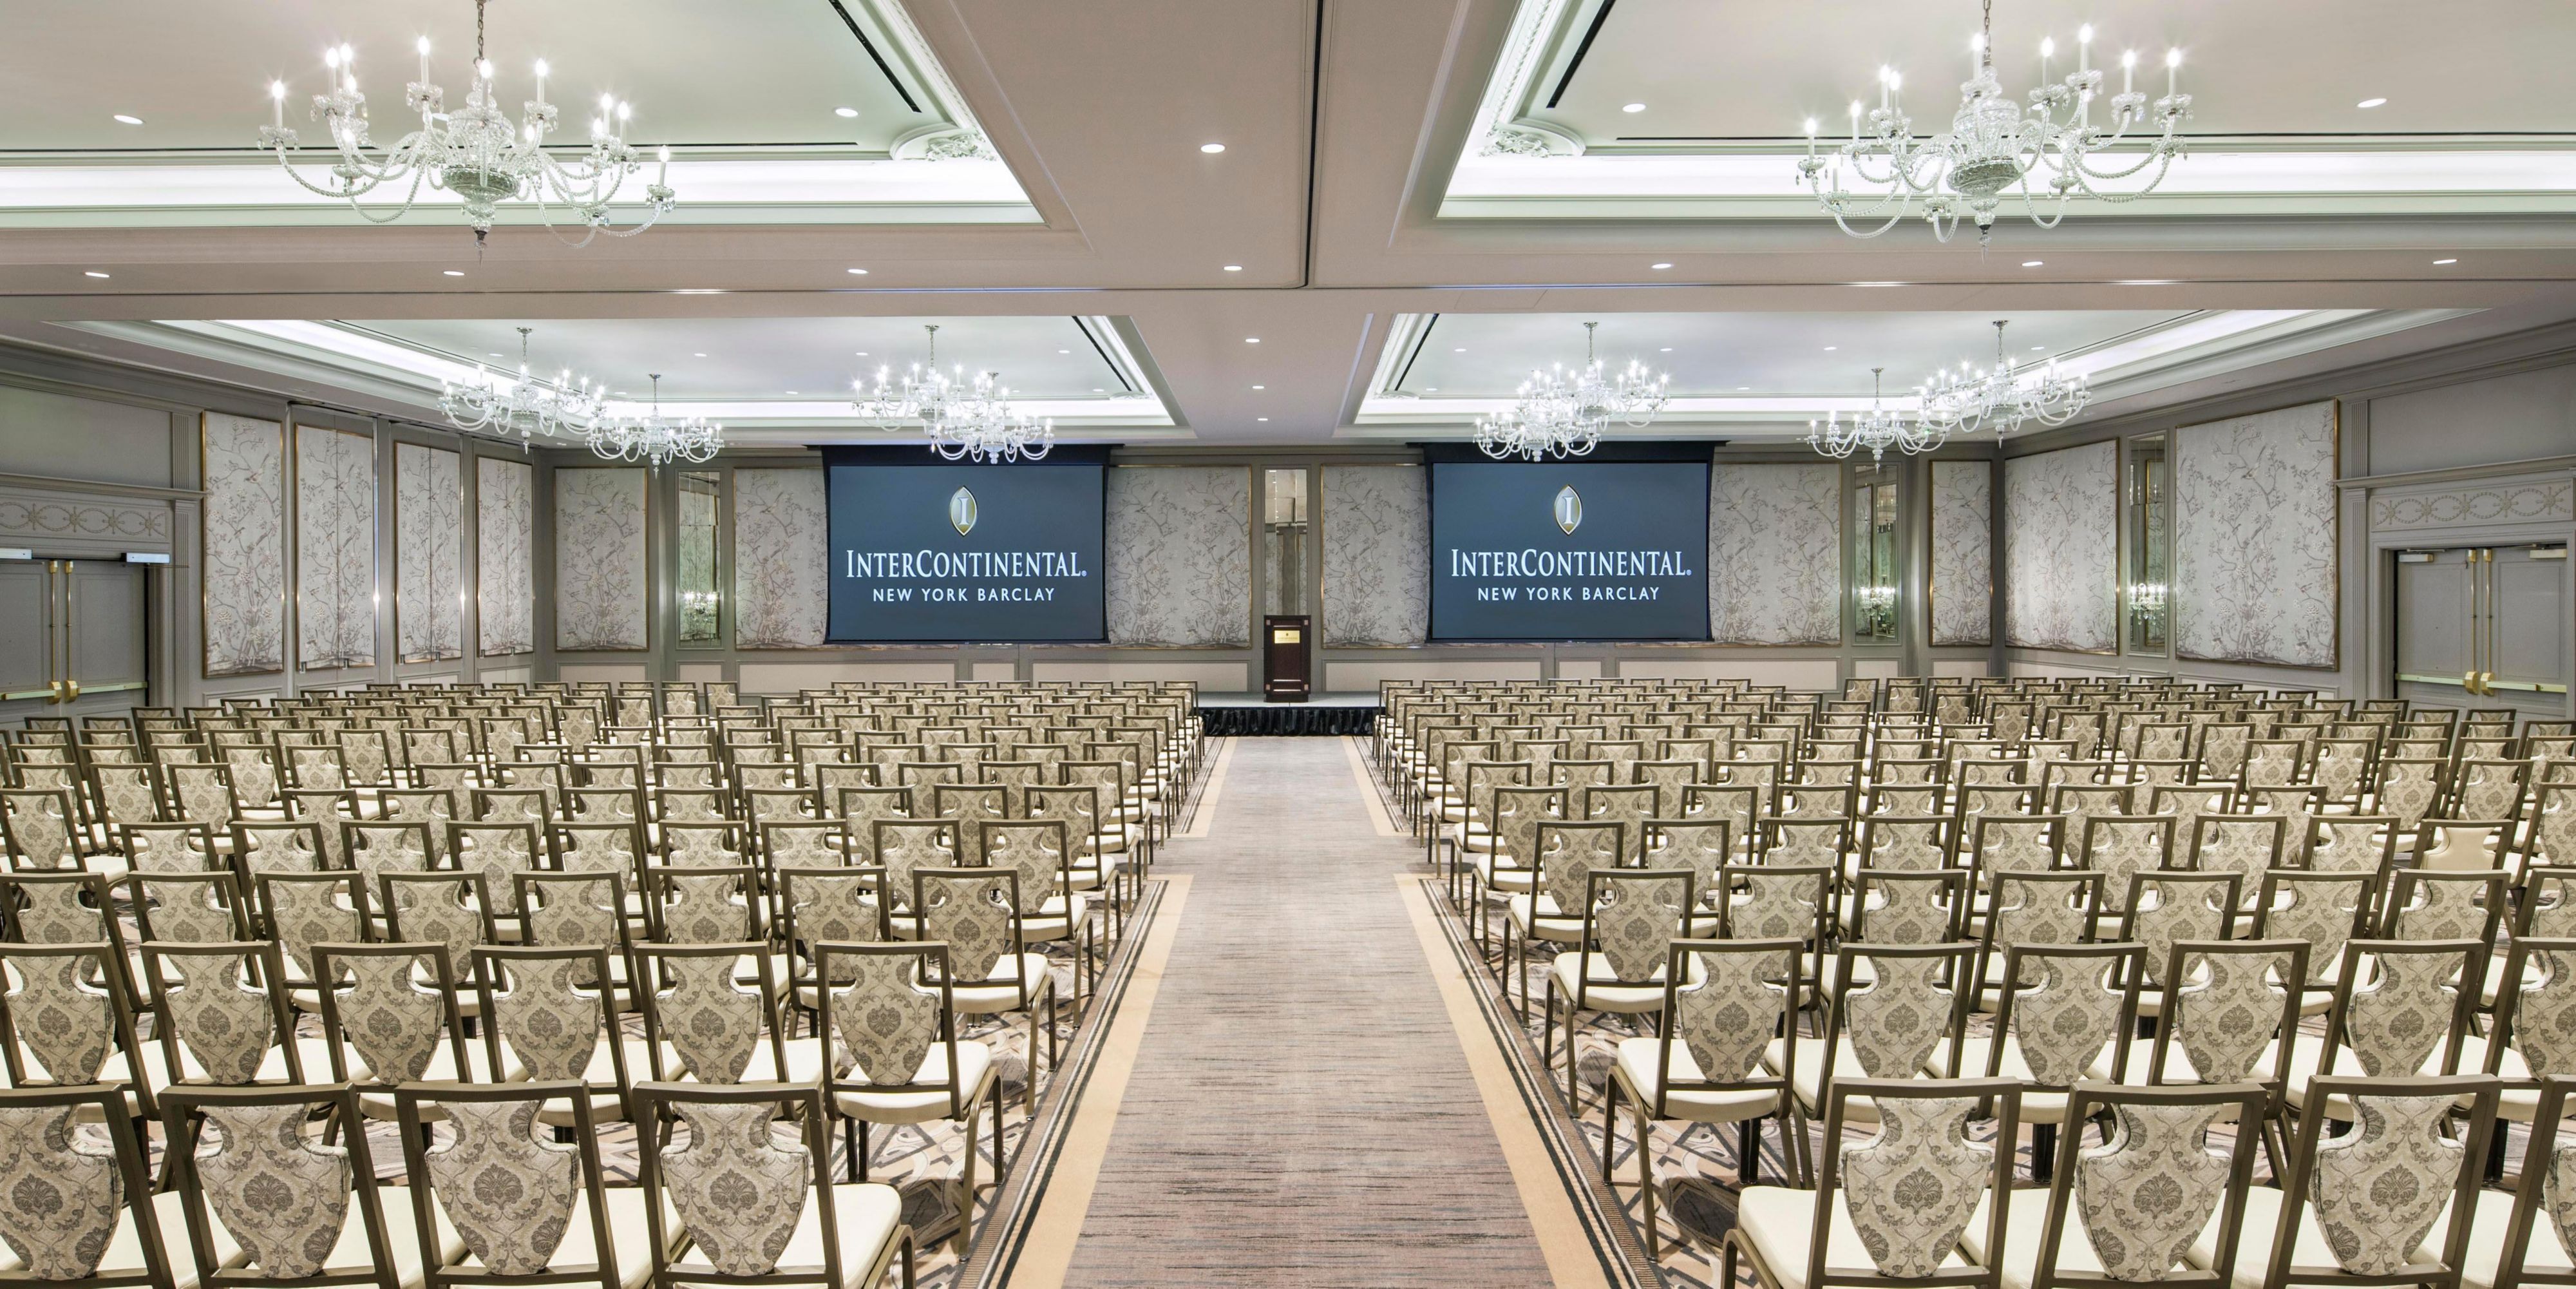 20,000 square feet of event space — including two gleaming ballrooms — are a blank canvas waiting to be customized for your event needs. Our experienced and knowledgeable culinary, wedding planning and technology teams work closely with you to take your event seamlessly from concept to reality.